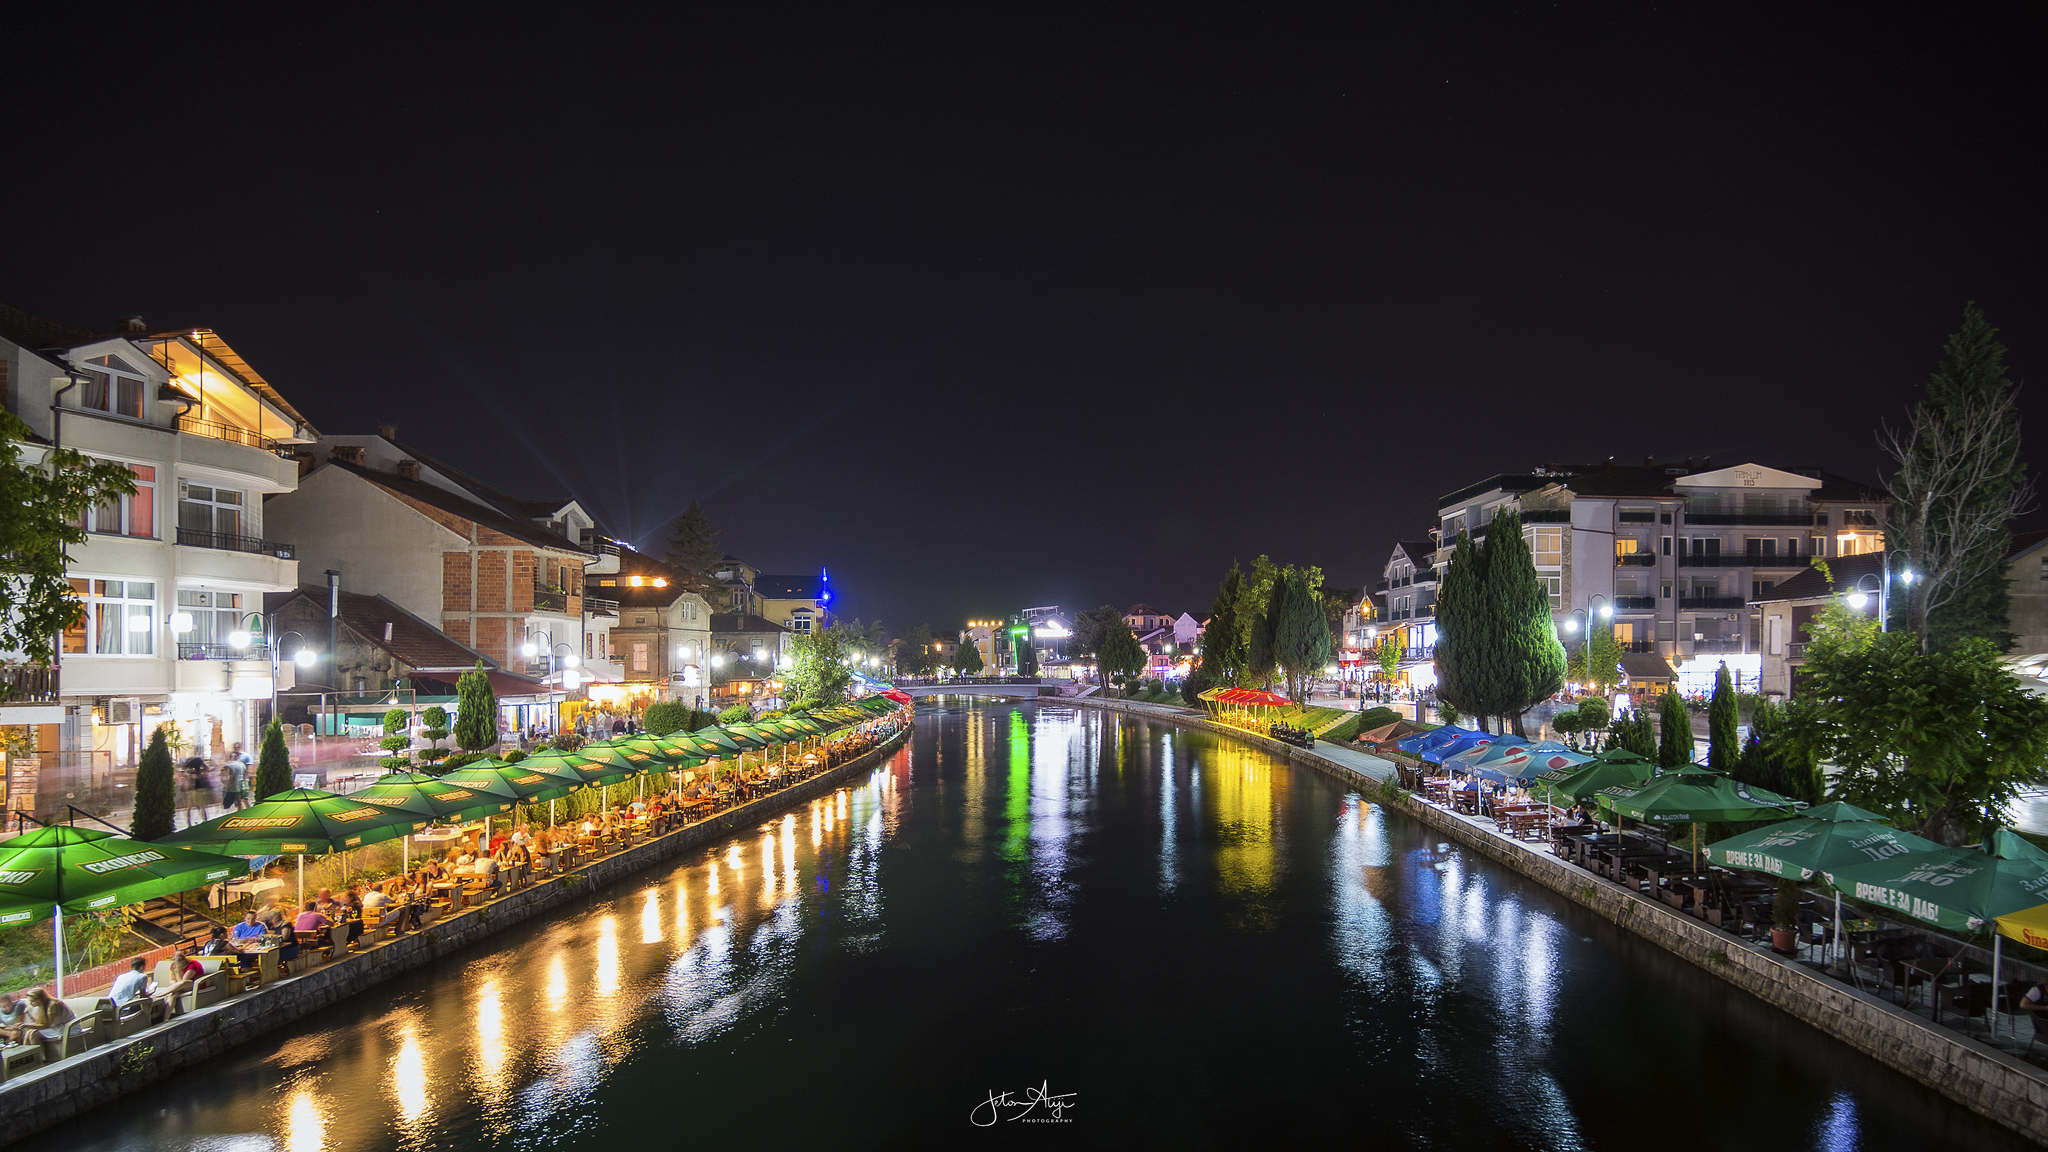 Struga, Macedonia, Macedonia - Struga Macedonia 2018 , HD Wallpaper & Backgrounds